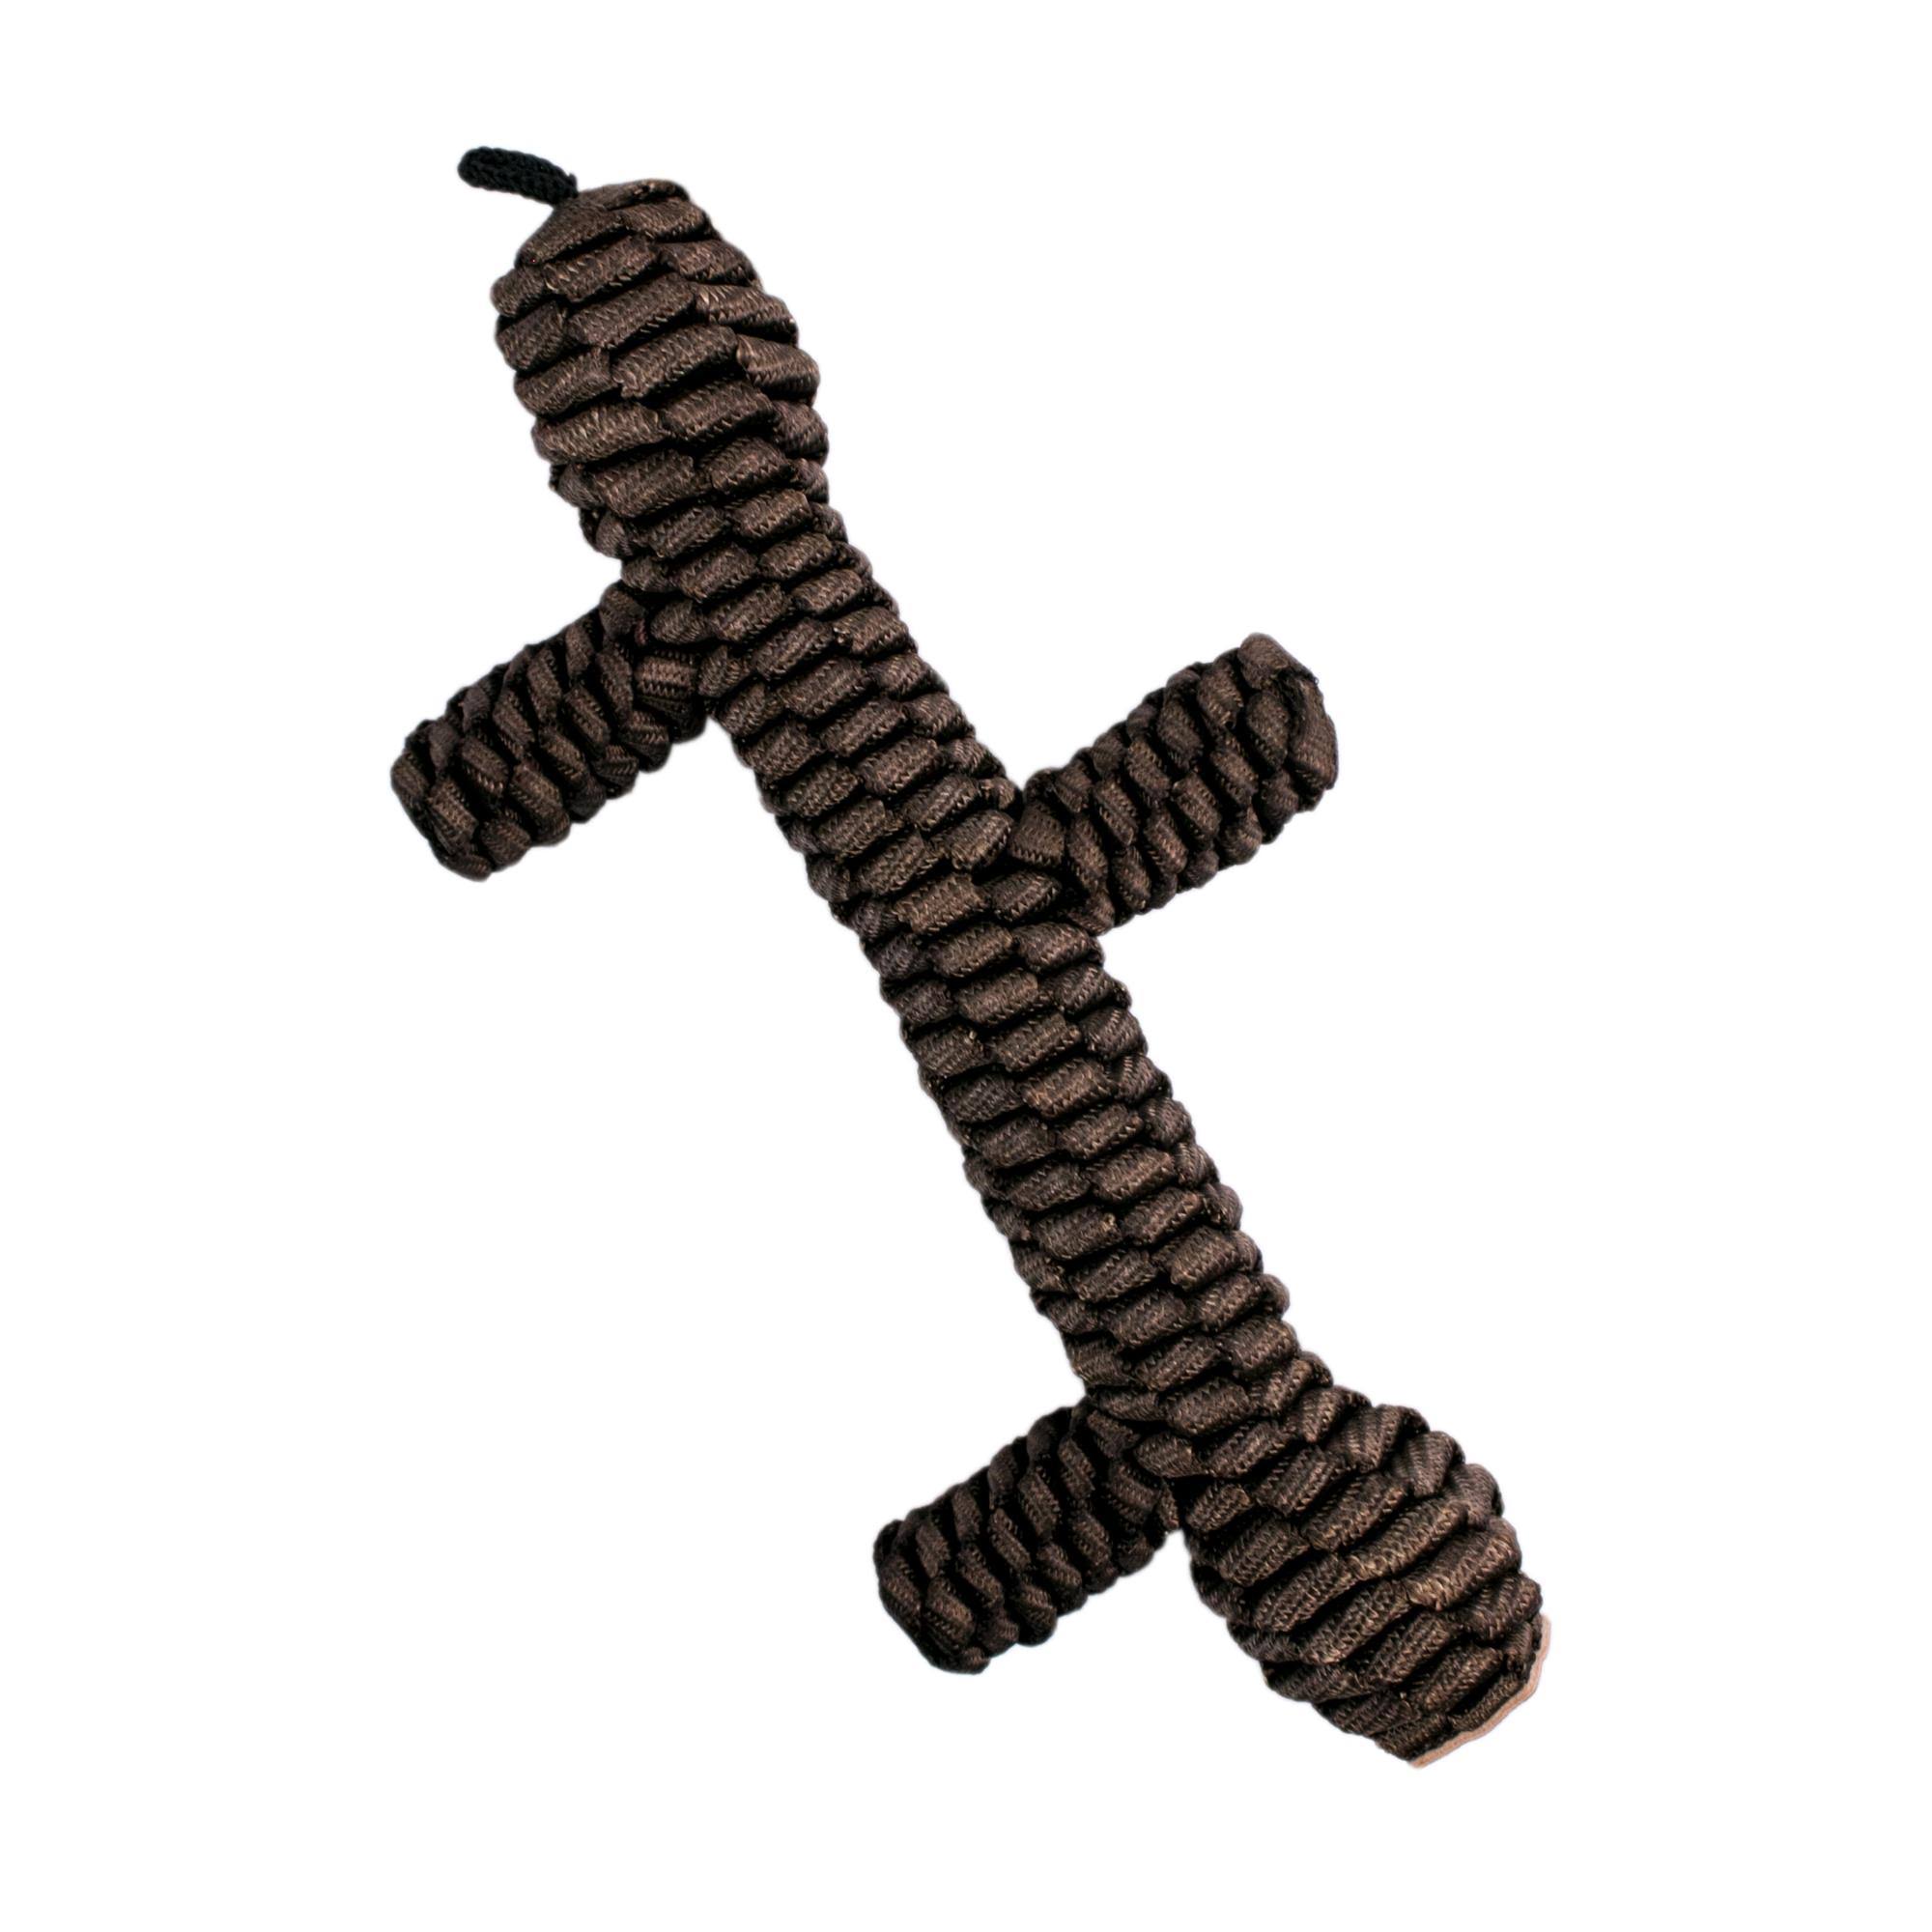 Tall Tails Brown Braided Stick Toy 9 in